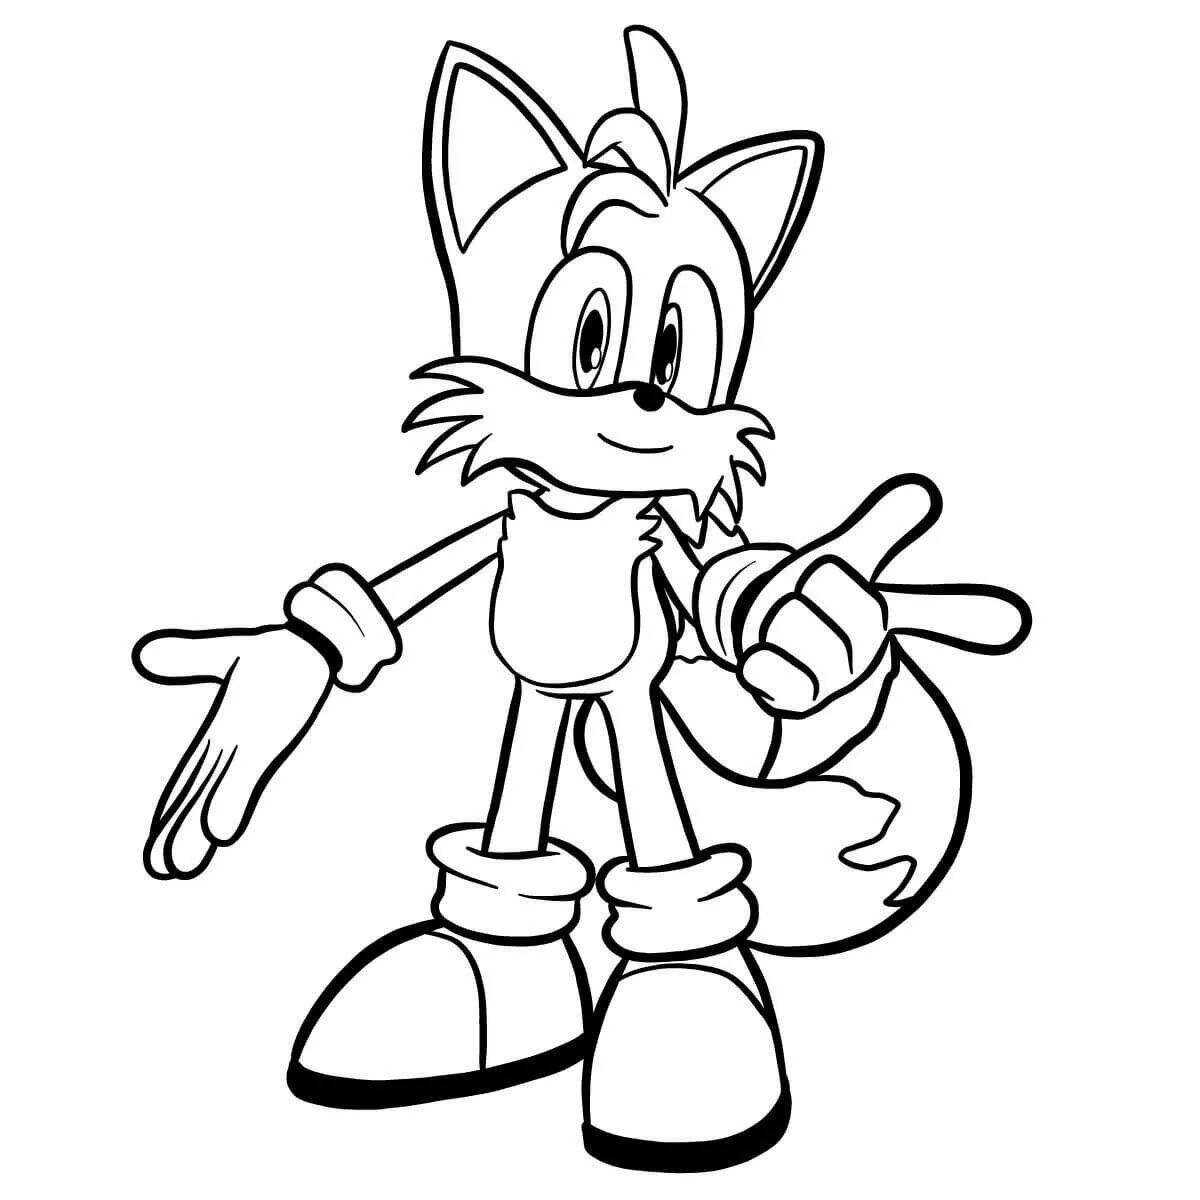 Furry tails coloring page